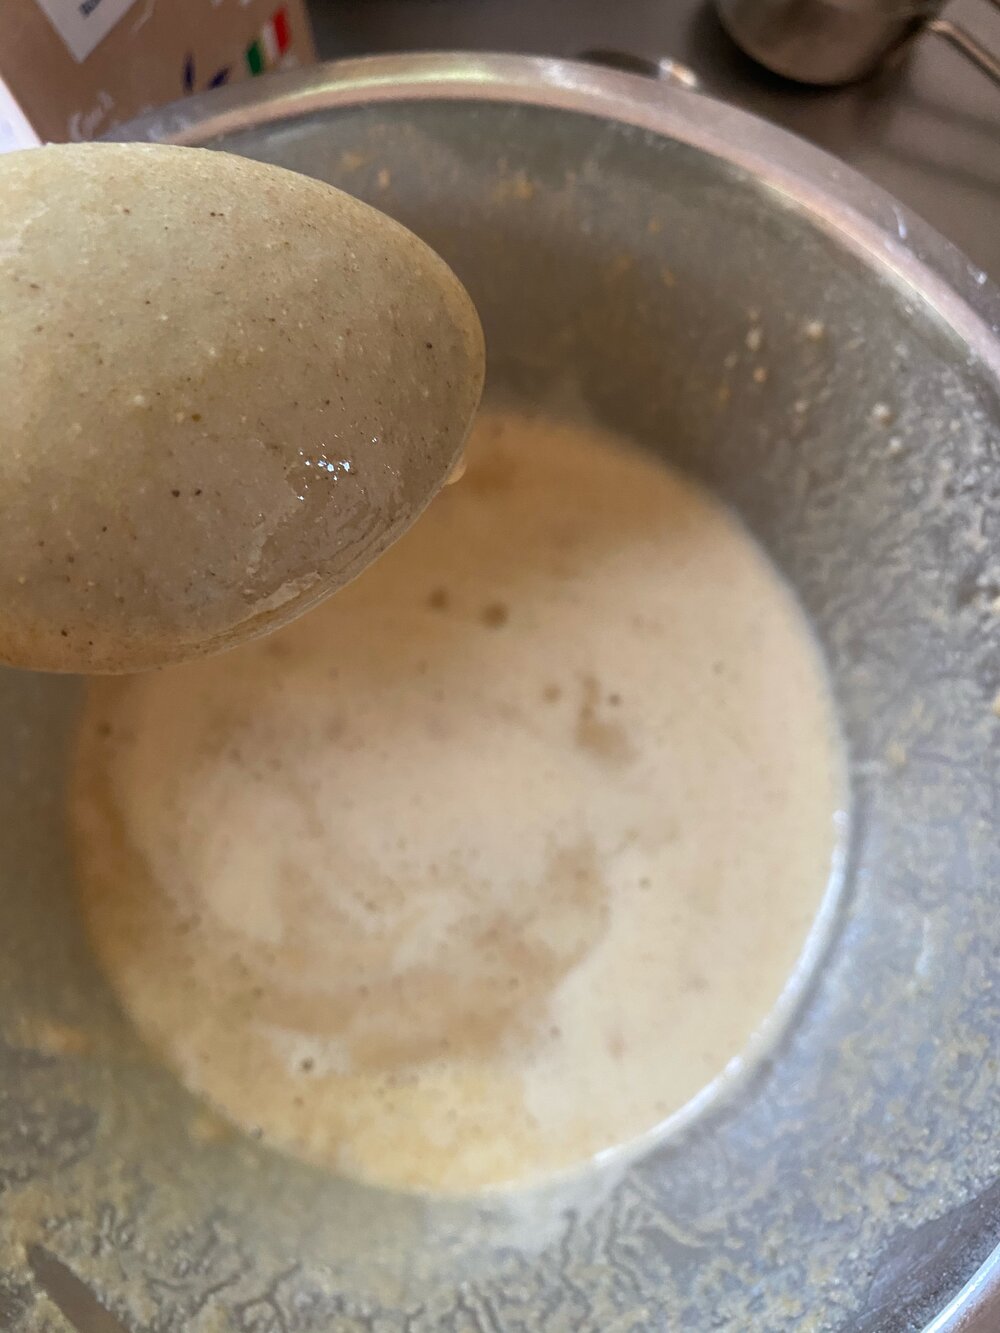 Mix nicely coating the back of a spoon - the best indicator for a good thickness of batter